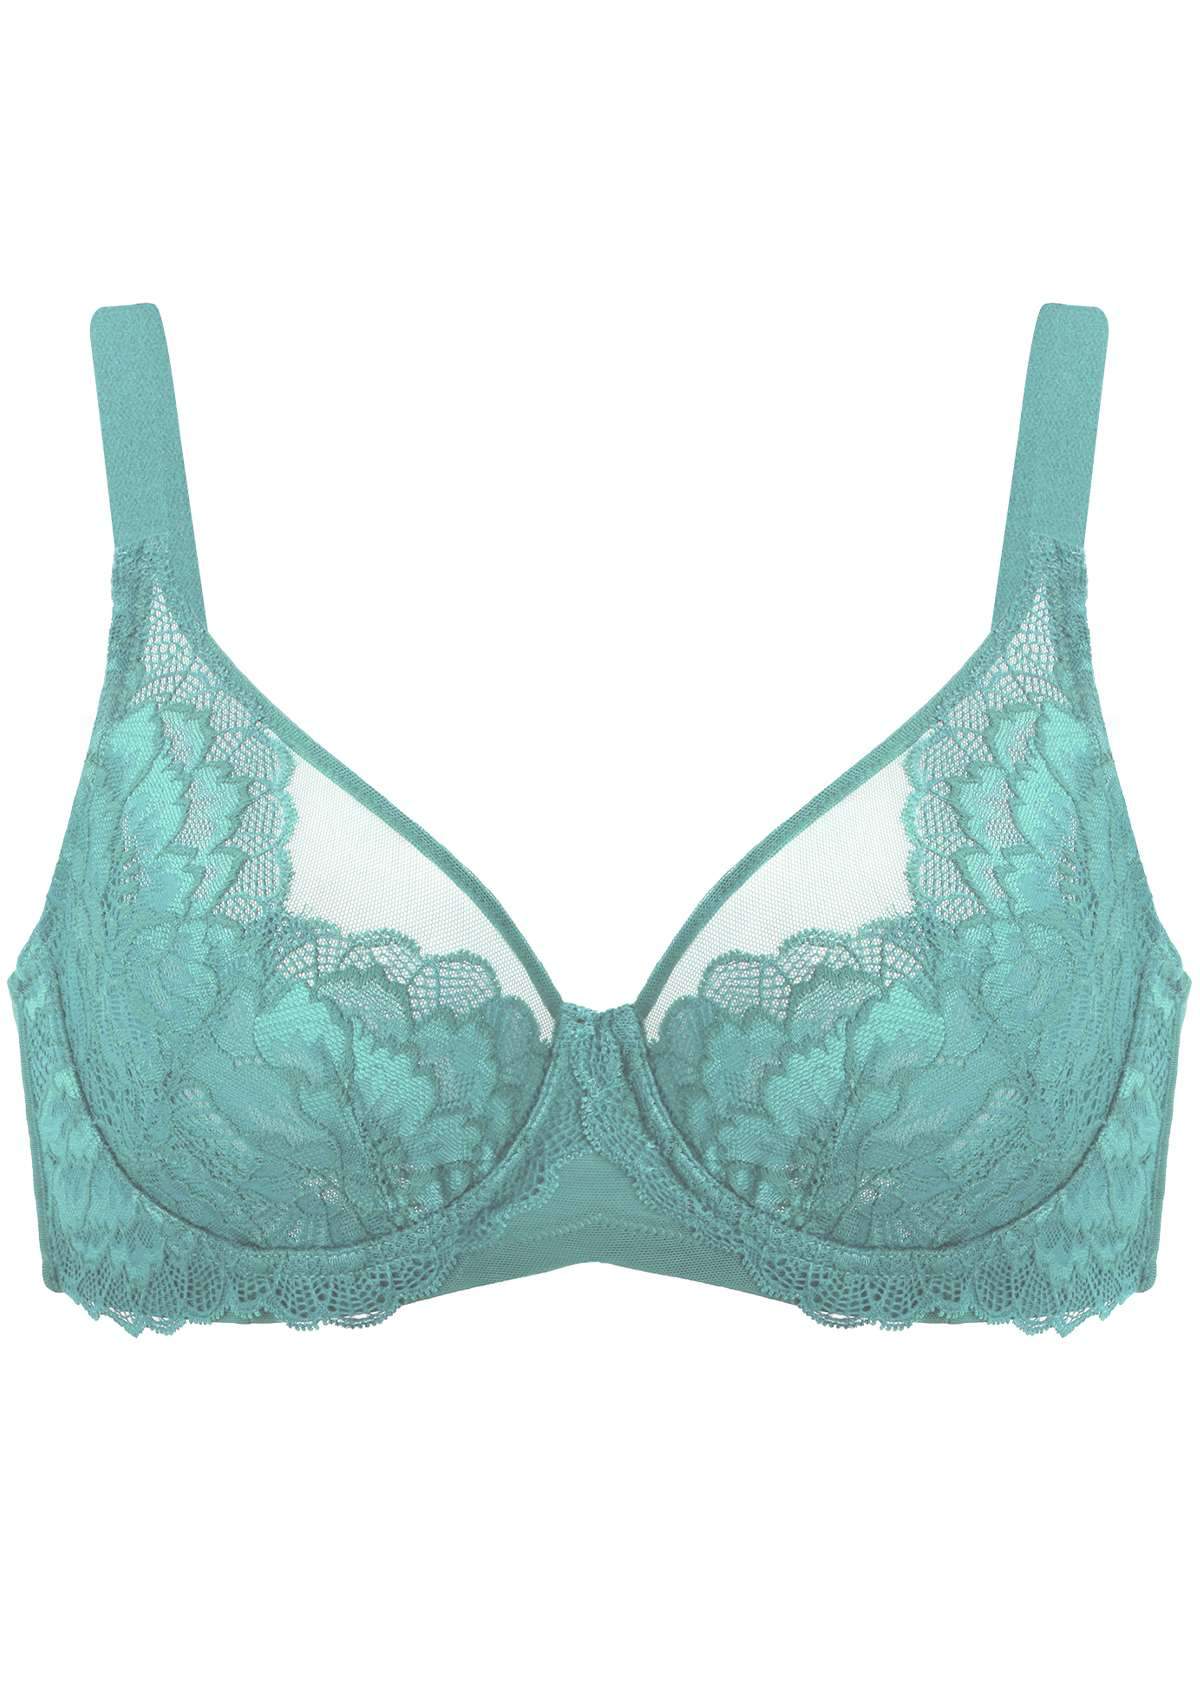 HSIA Paeonia Lace Full Coverage Underwire Non-Padded Uplifting Bra - Light Coral / 38 / C